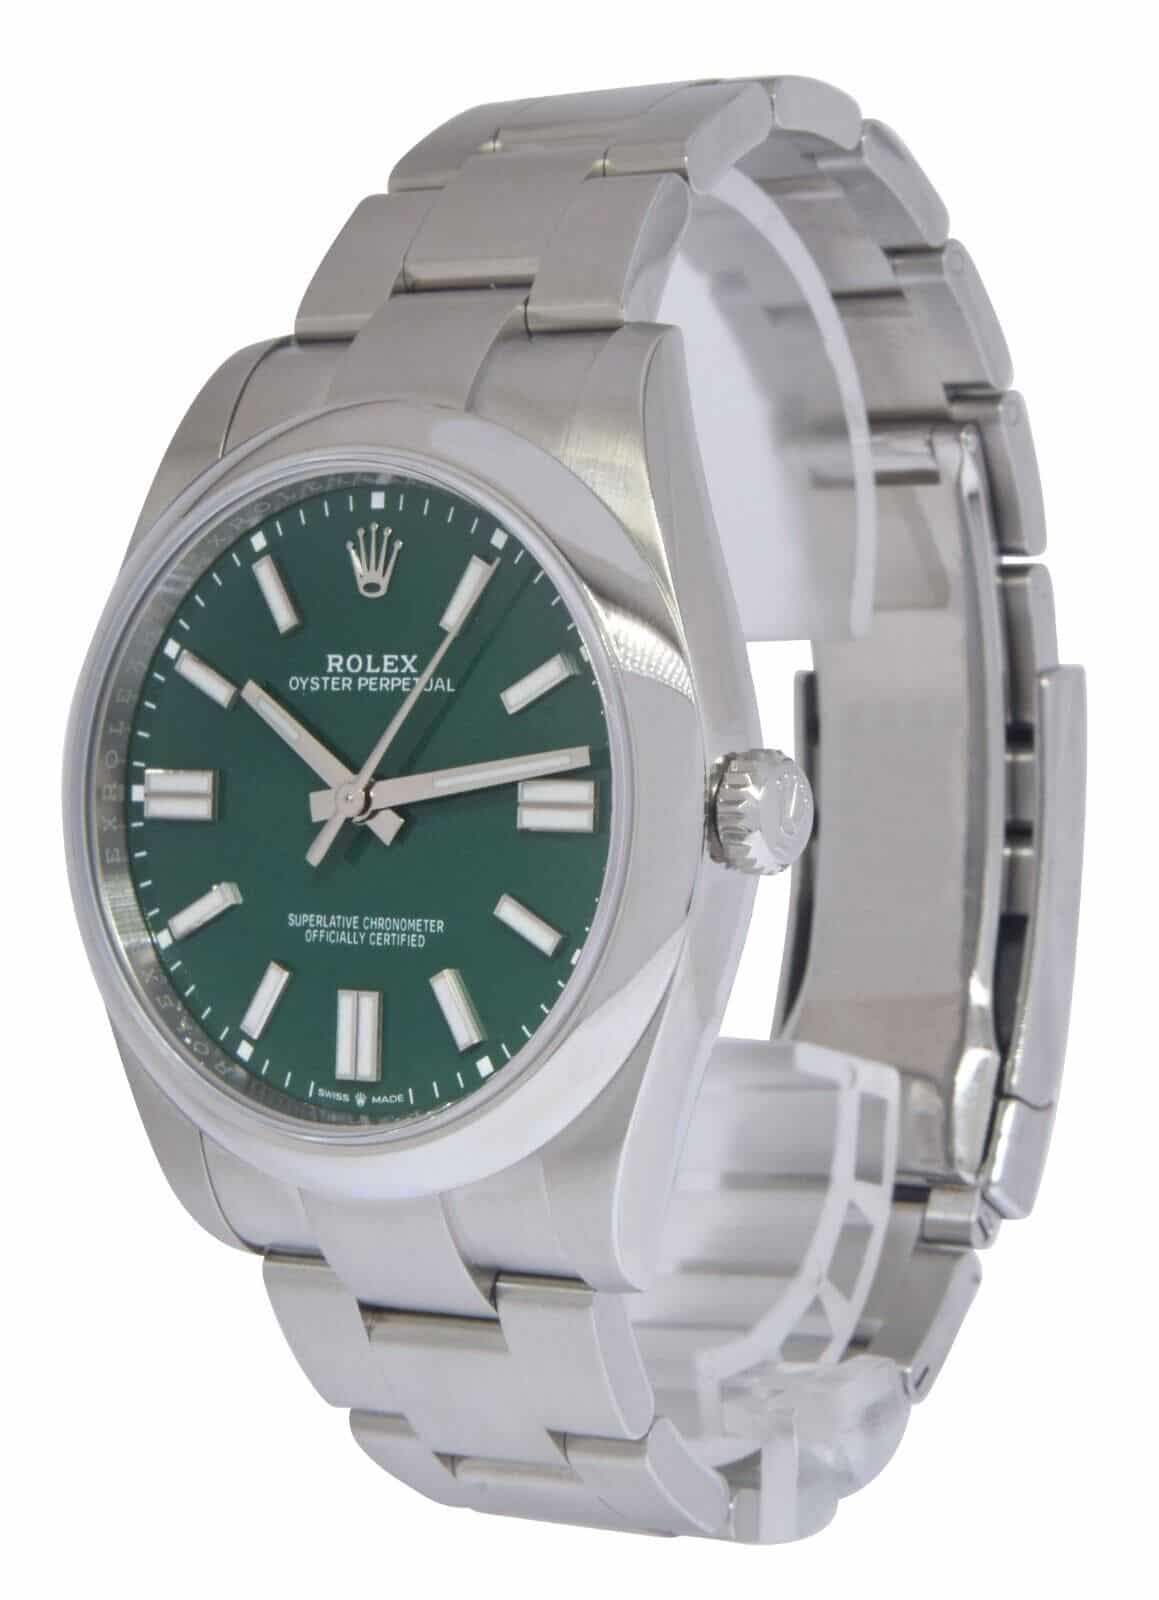 NEW Rolex Oyster Perpetual 41 Steel Green Dial Mens Watch Box/Papers '24 124300